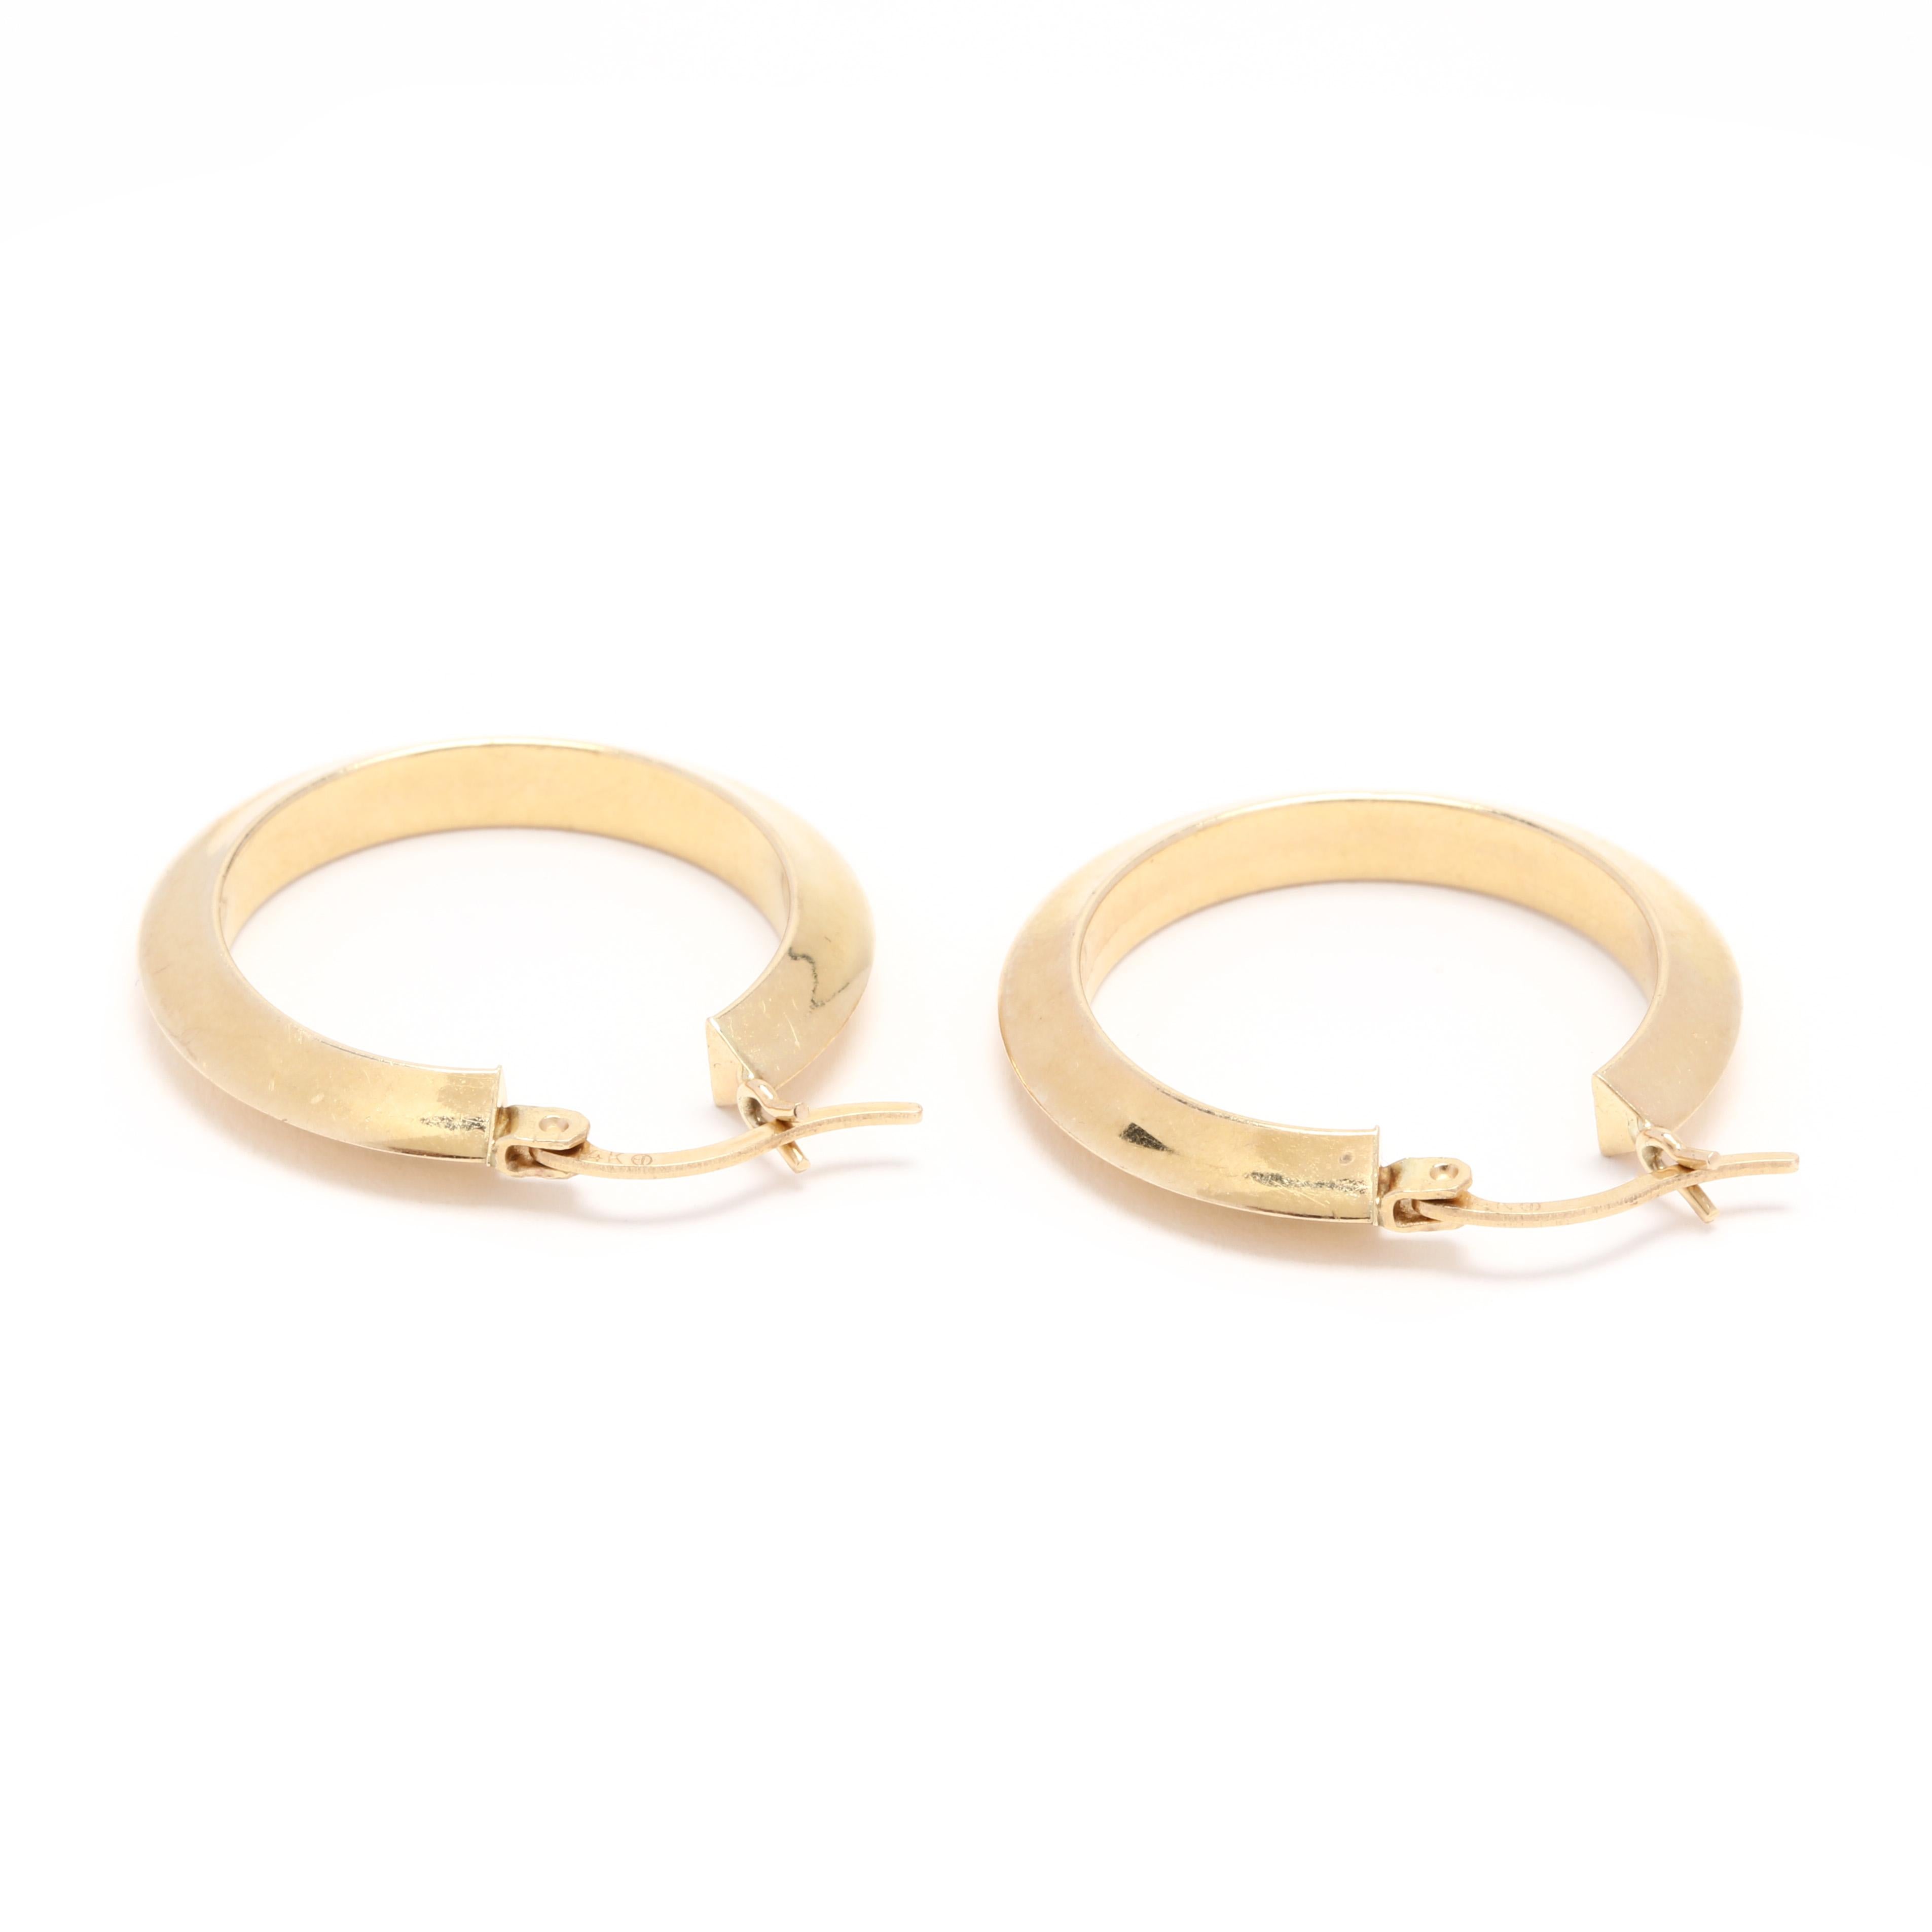 A pair of 14 karat yellow gold knife edge hoop earrings. These earrings feature a knife edge design in a circular design with a snap in closure.

Length: 1 in.

Width: 3.6 mm

2.27 dwts.

* Please note that this is a vintage item and may show signs